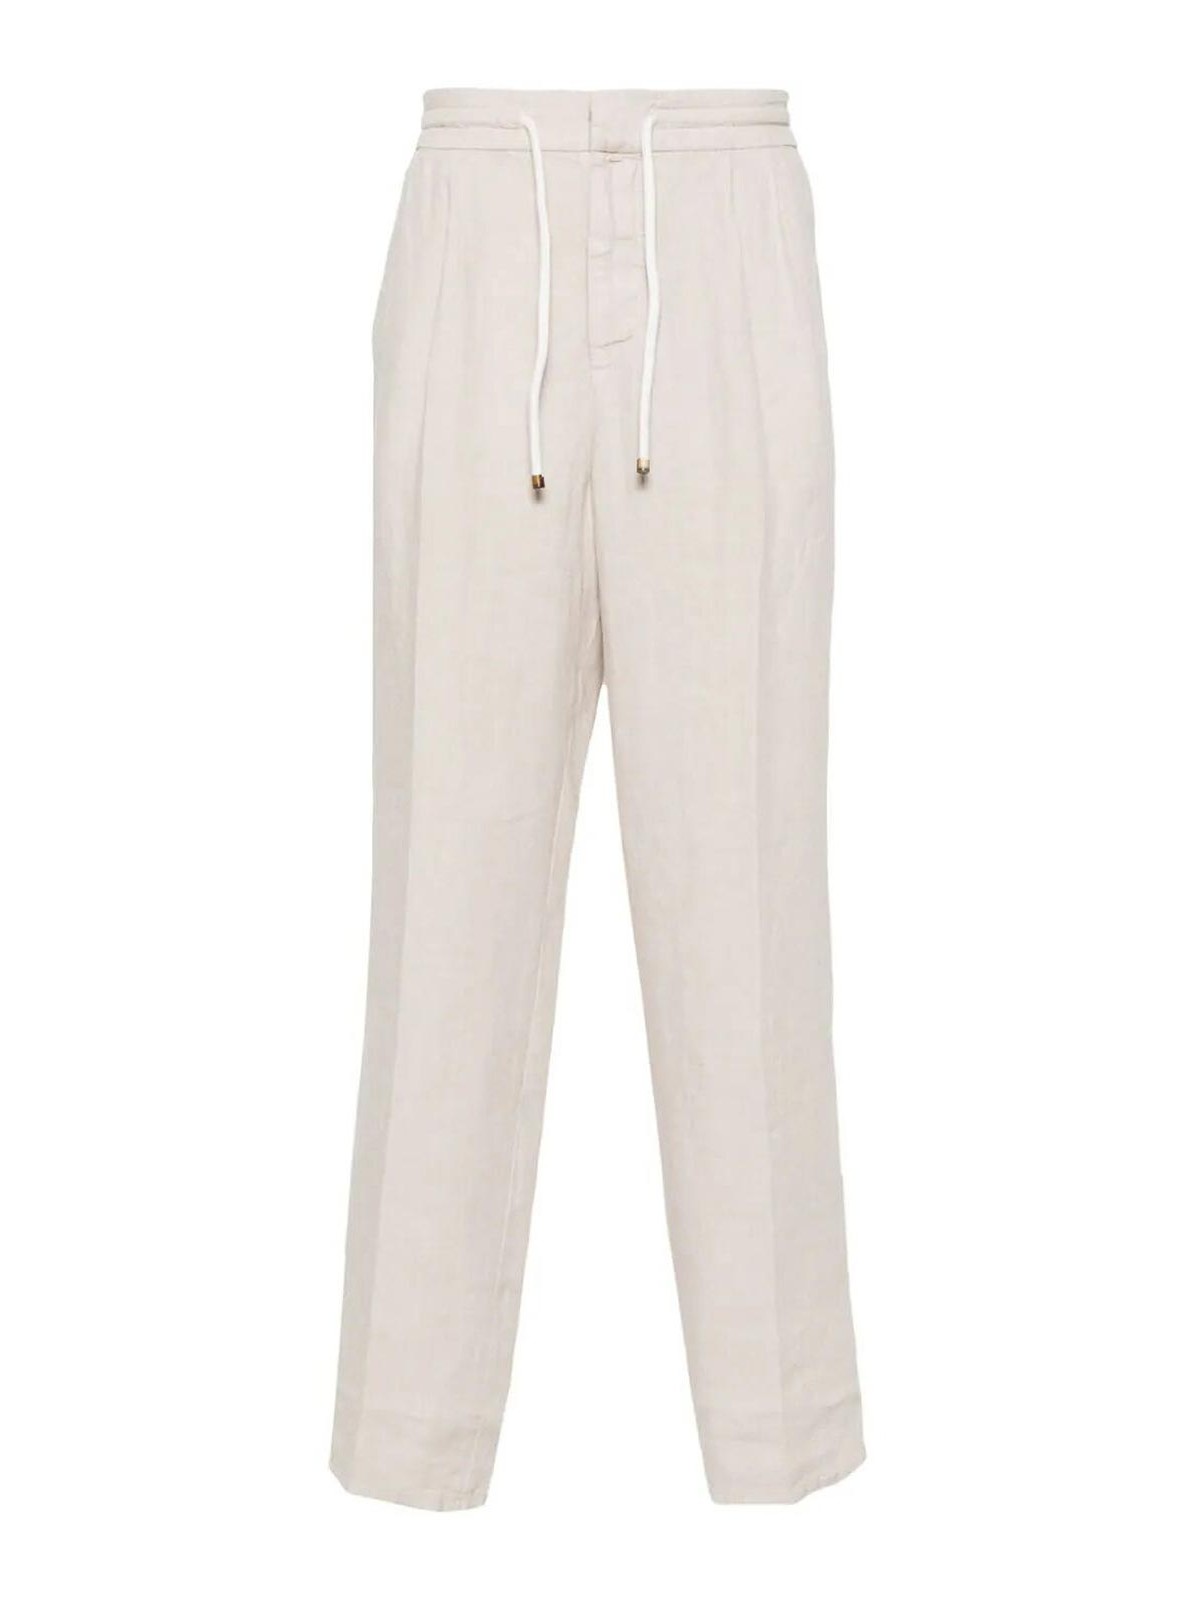 Brunello Cucinelli Pants With Drawstring And Double Pleats In Neutral